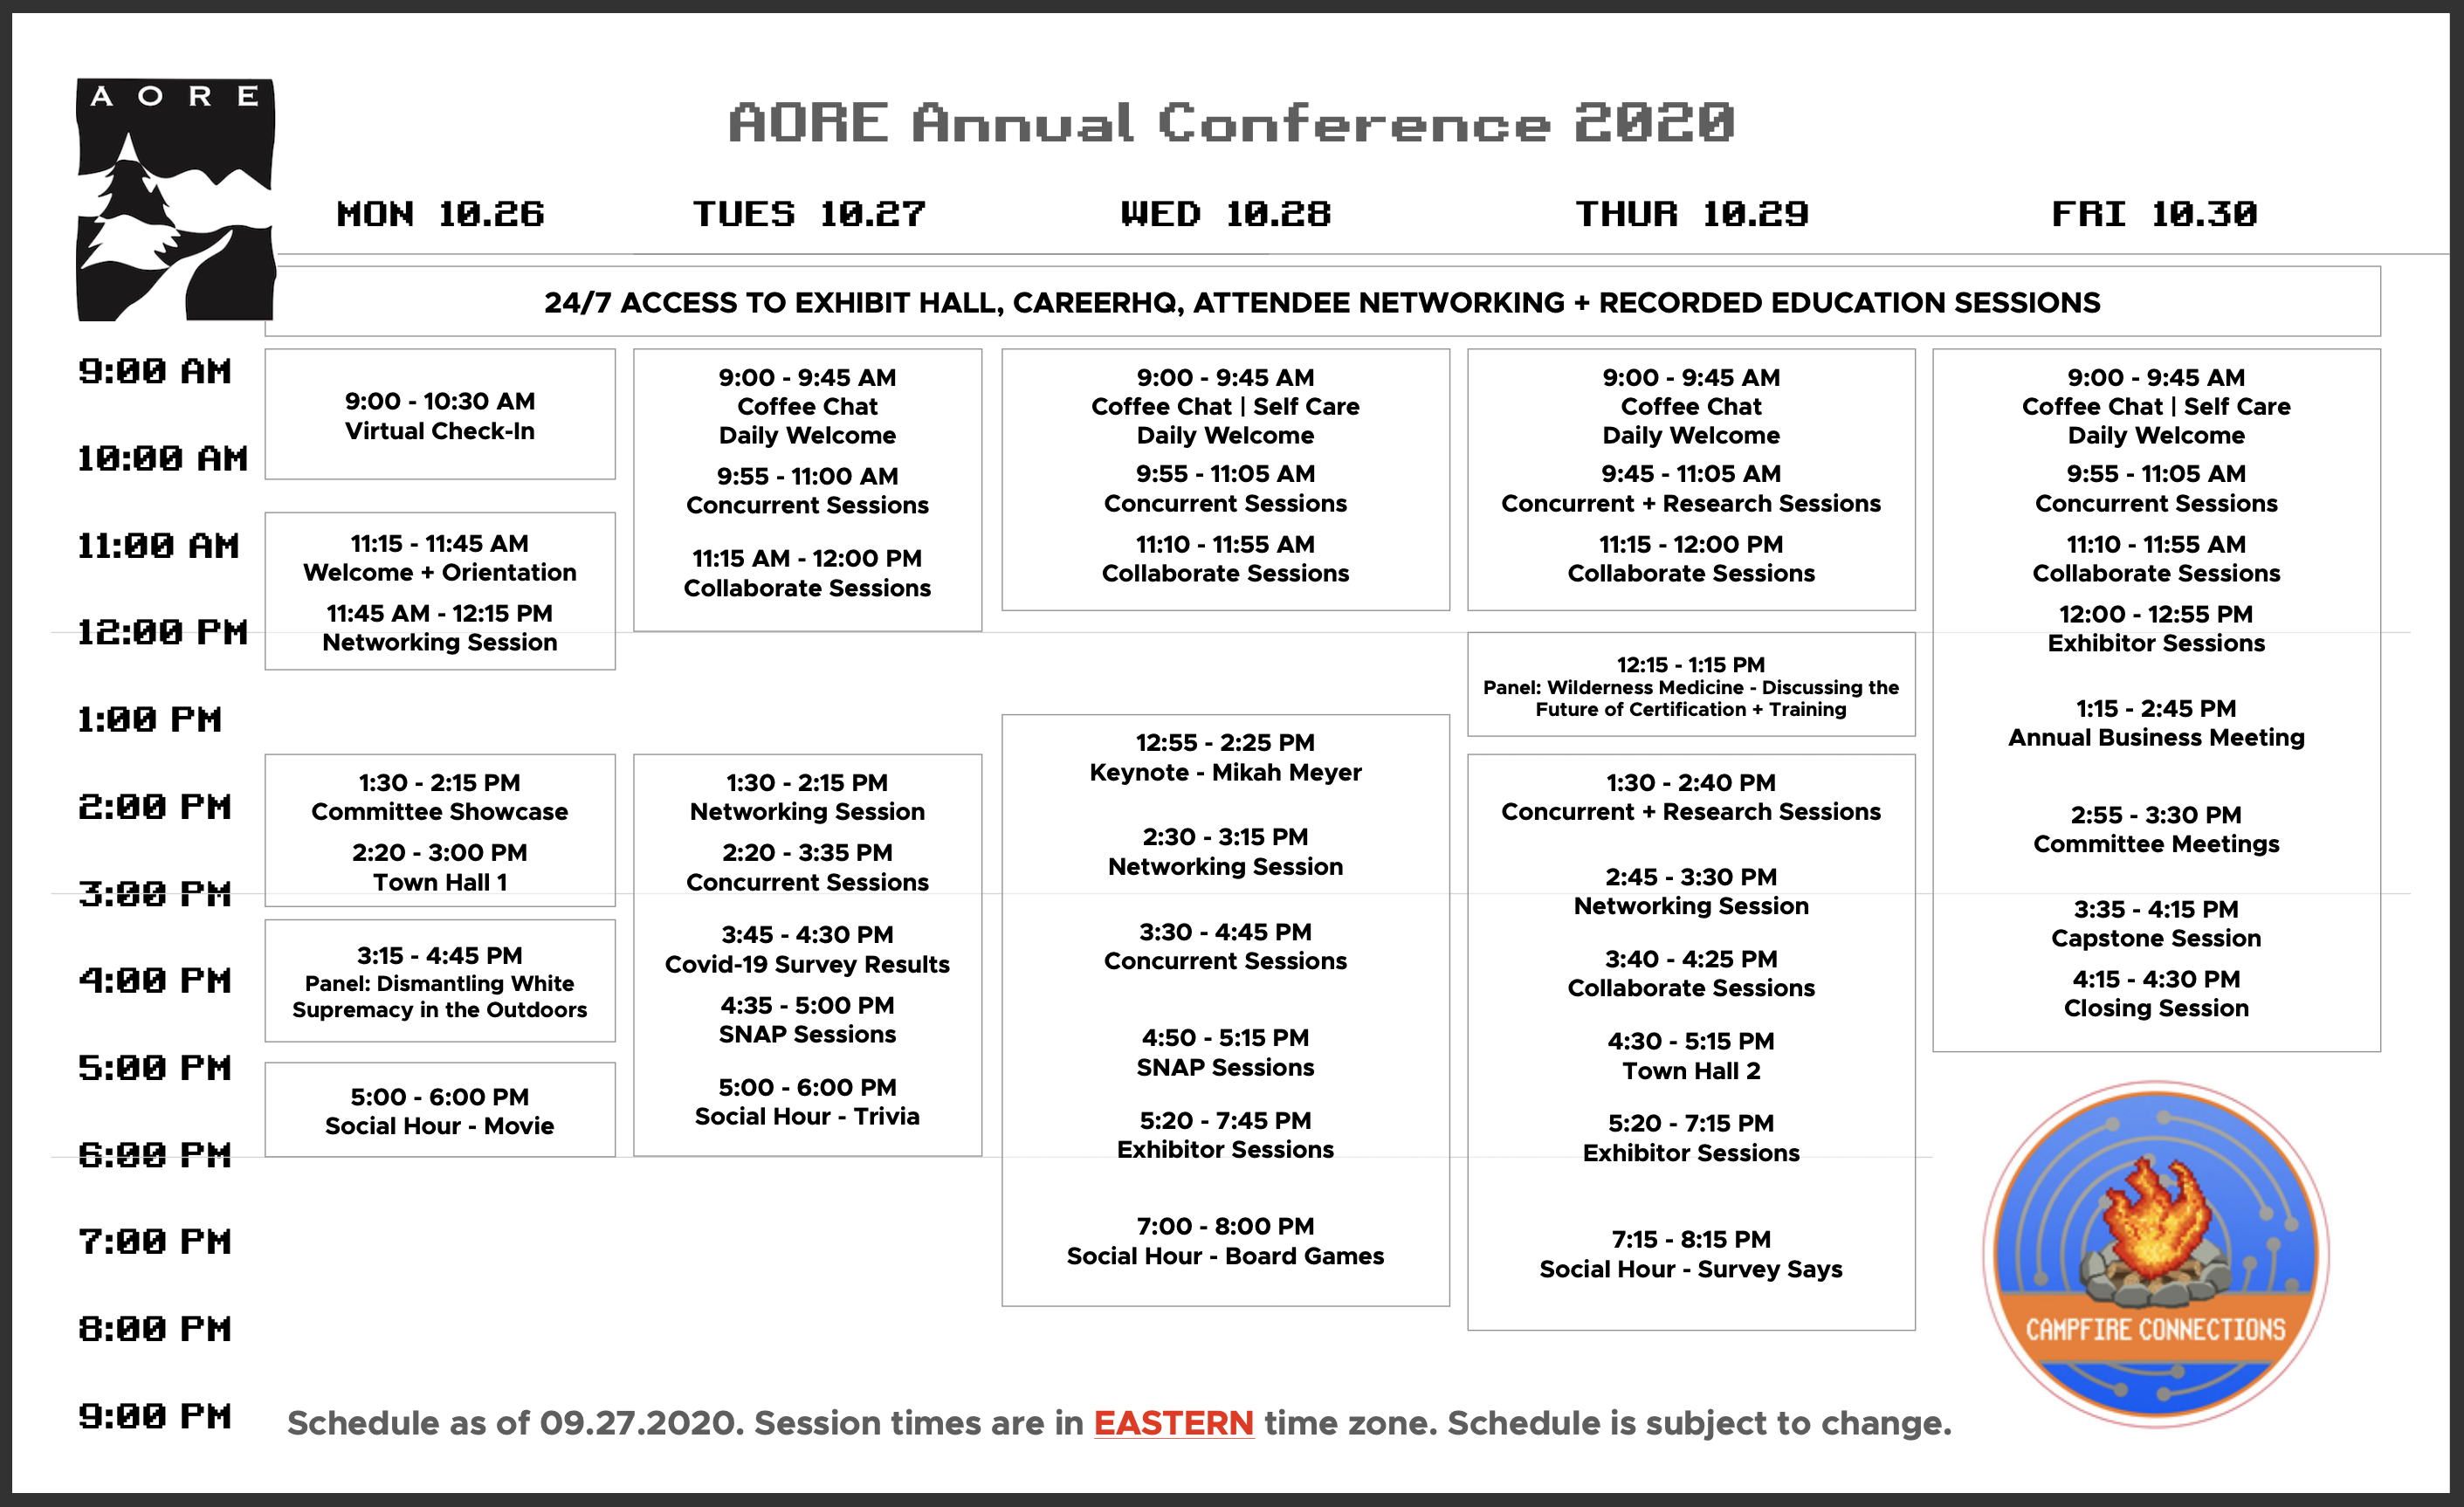 AORE Annual Conference 2020 Schedule At-a-Glance